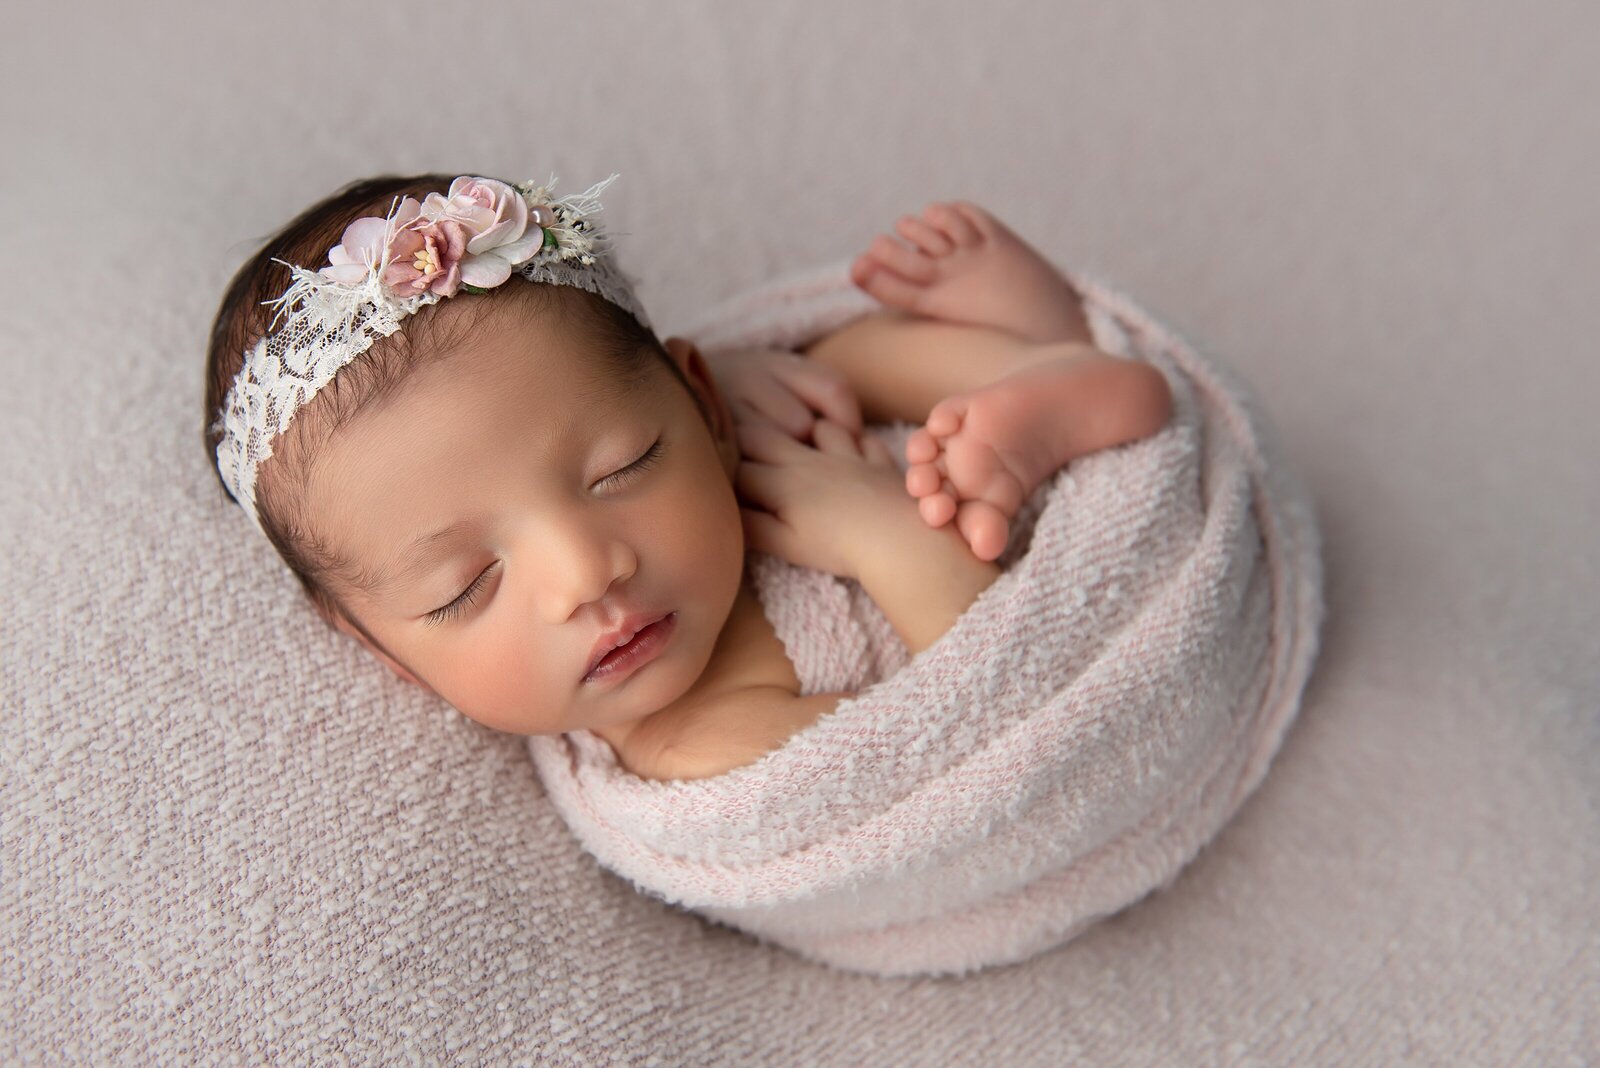 Newborn baby girl in pink photographed by Wellington, FL Maternity and Newborn Photographer, Julie Logan.